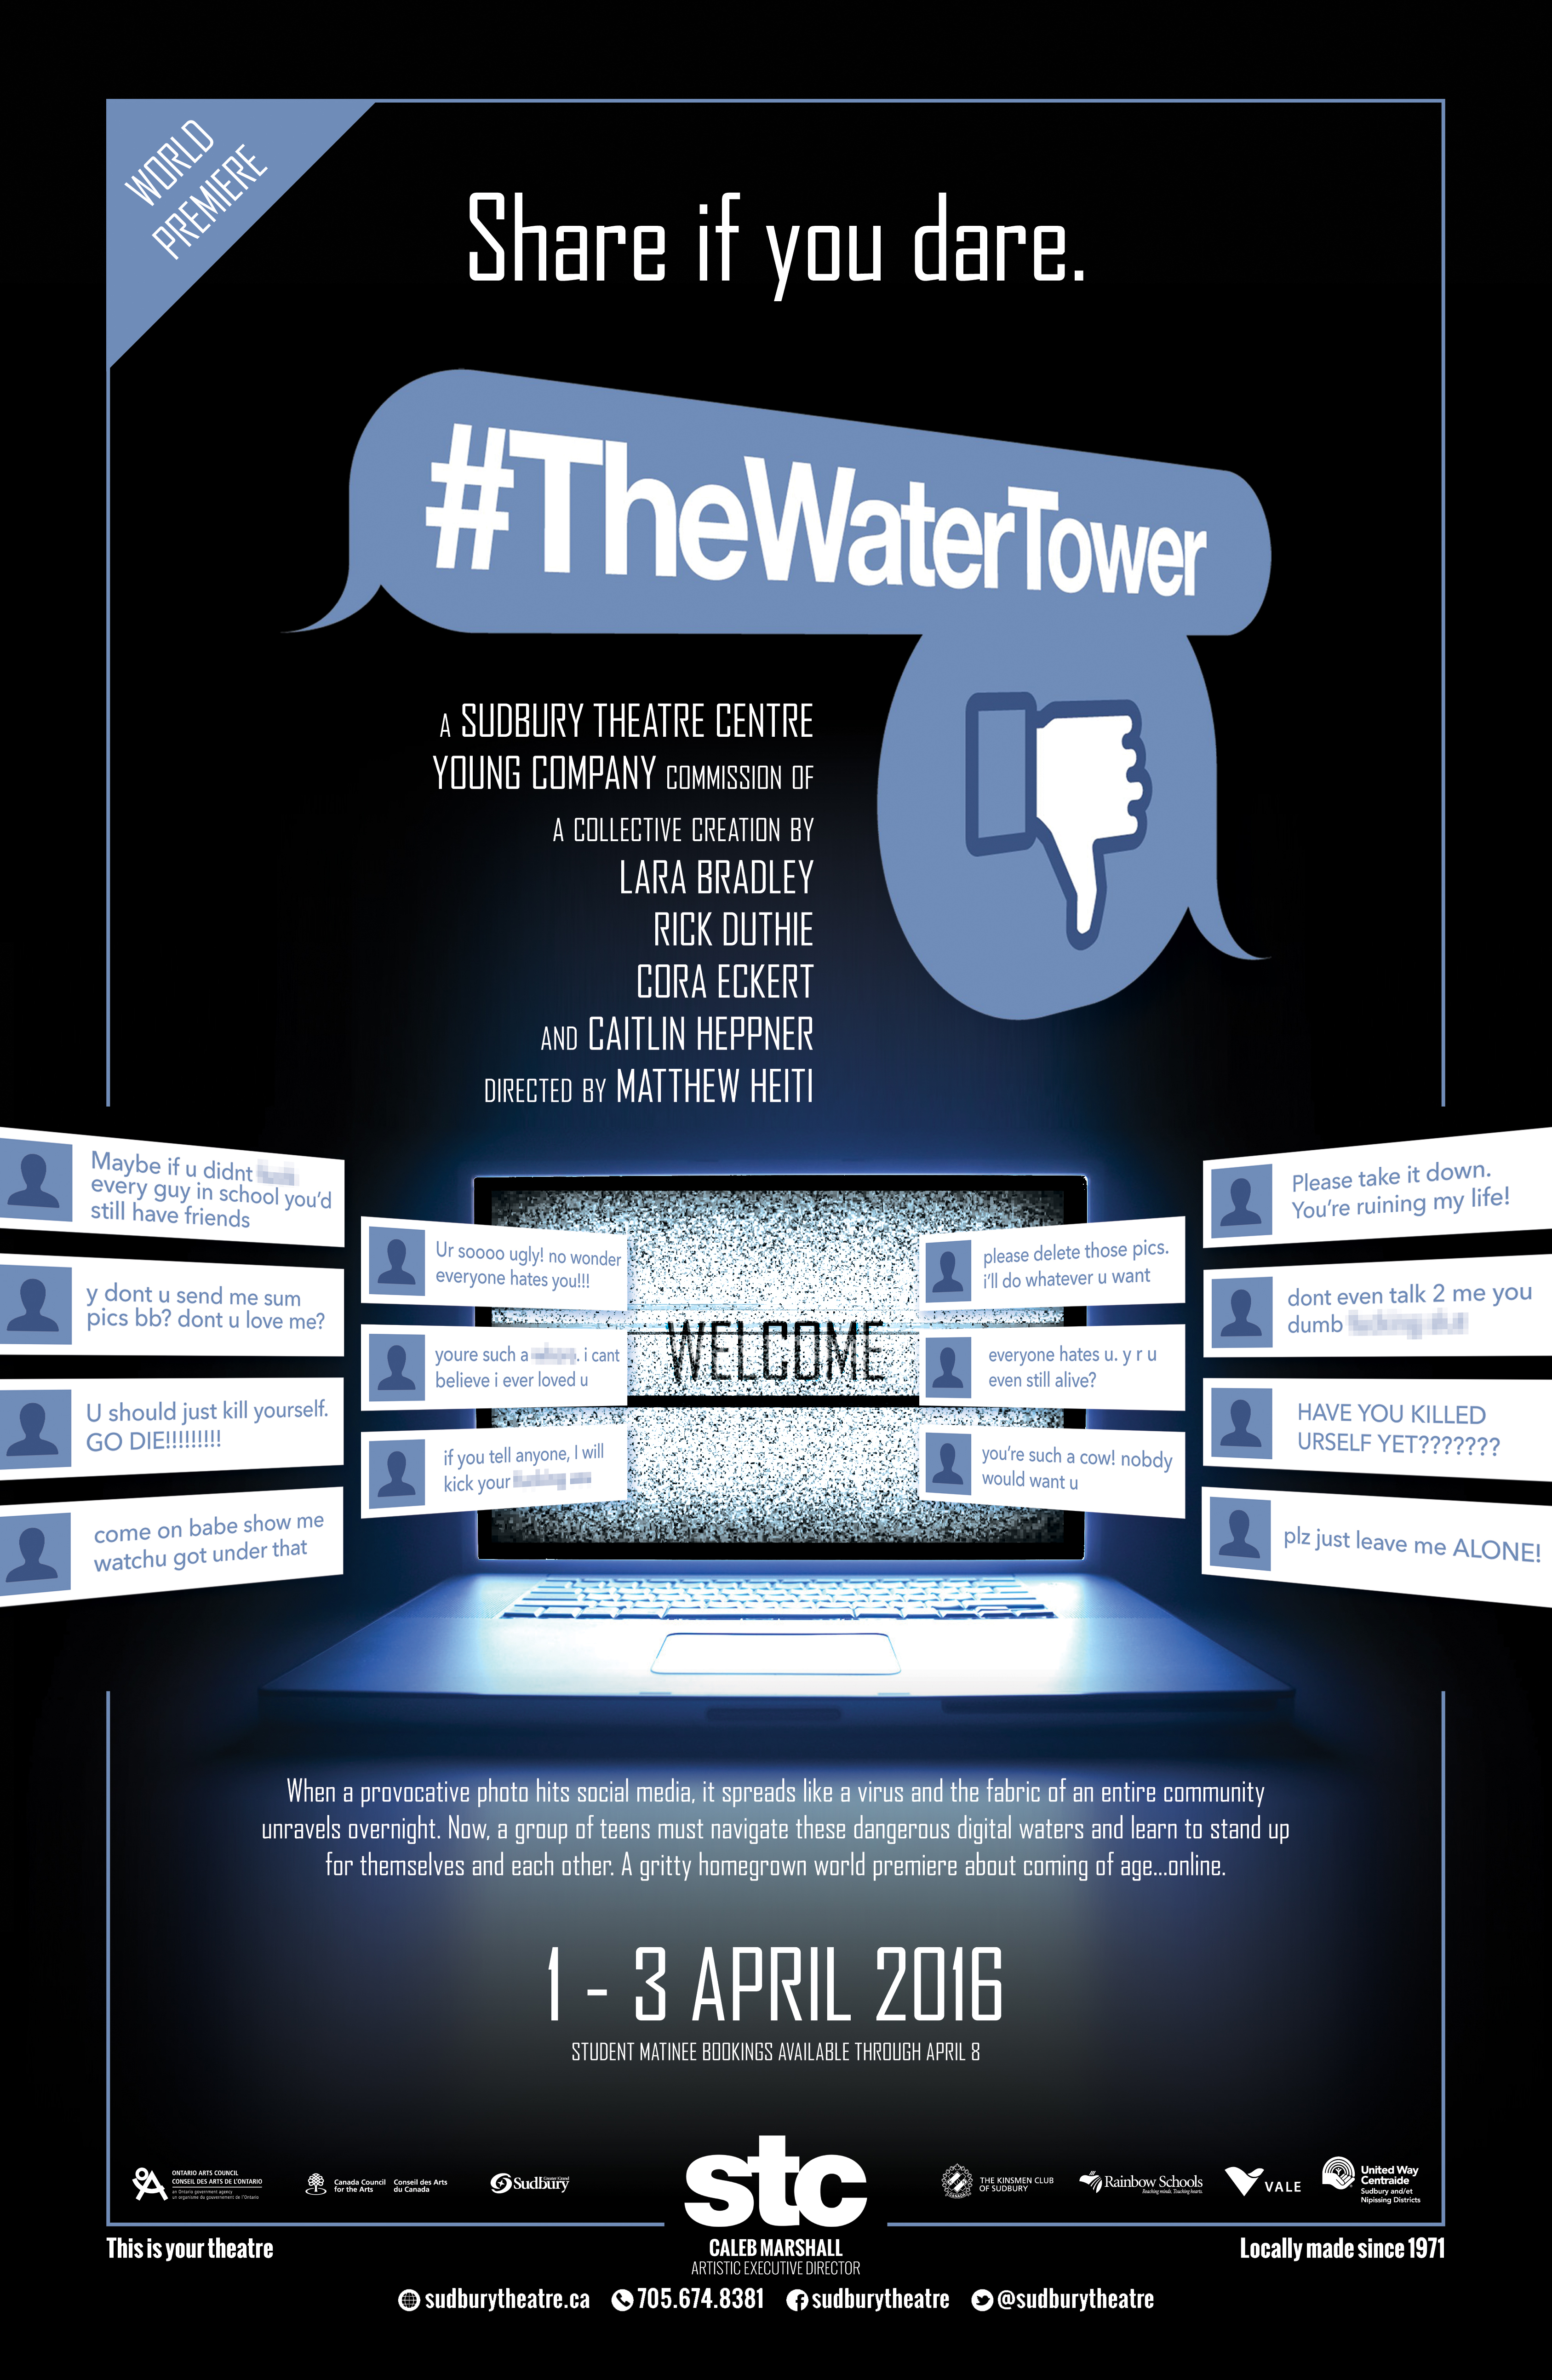 Local Playwrights Tackle Cyber Bullying in #TheWaterTower